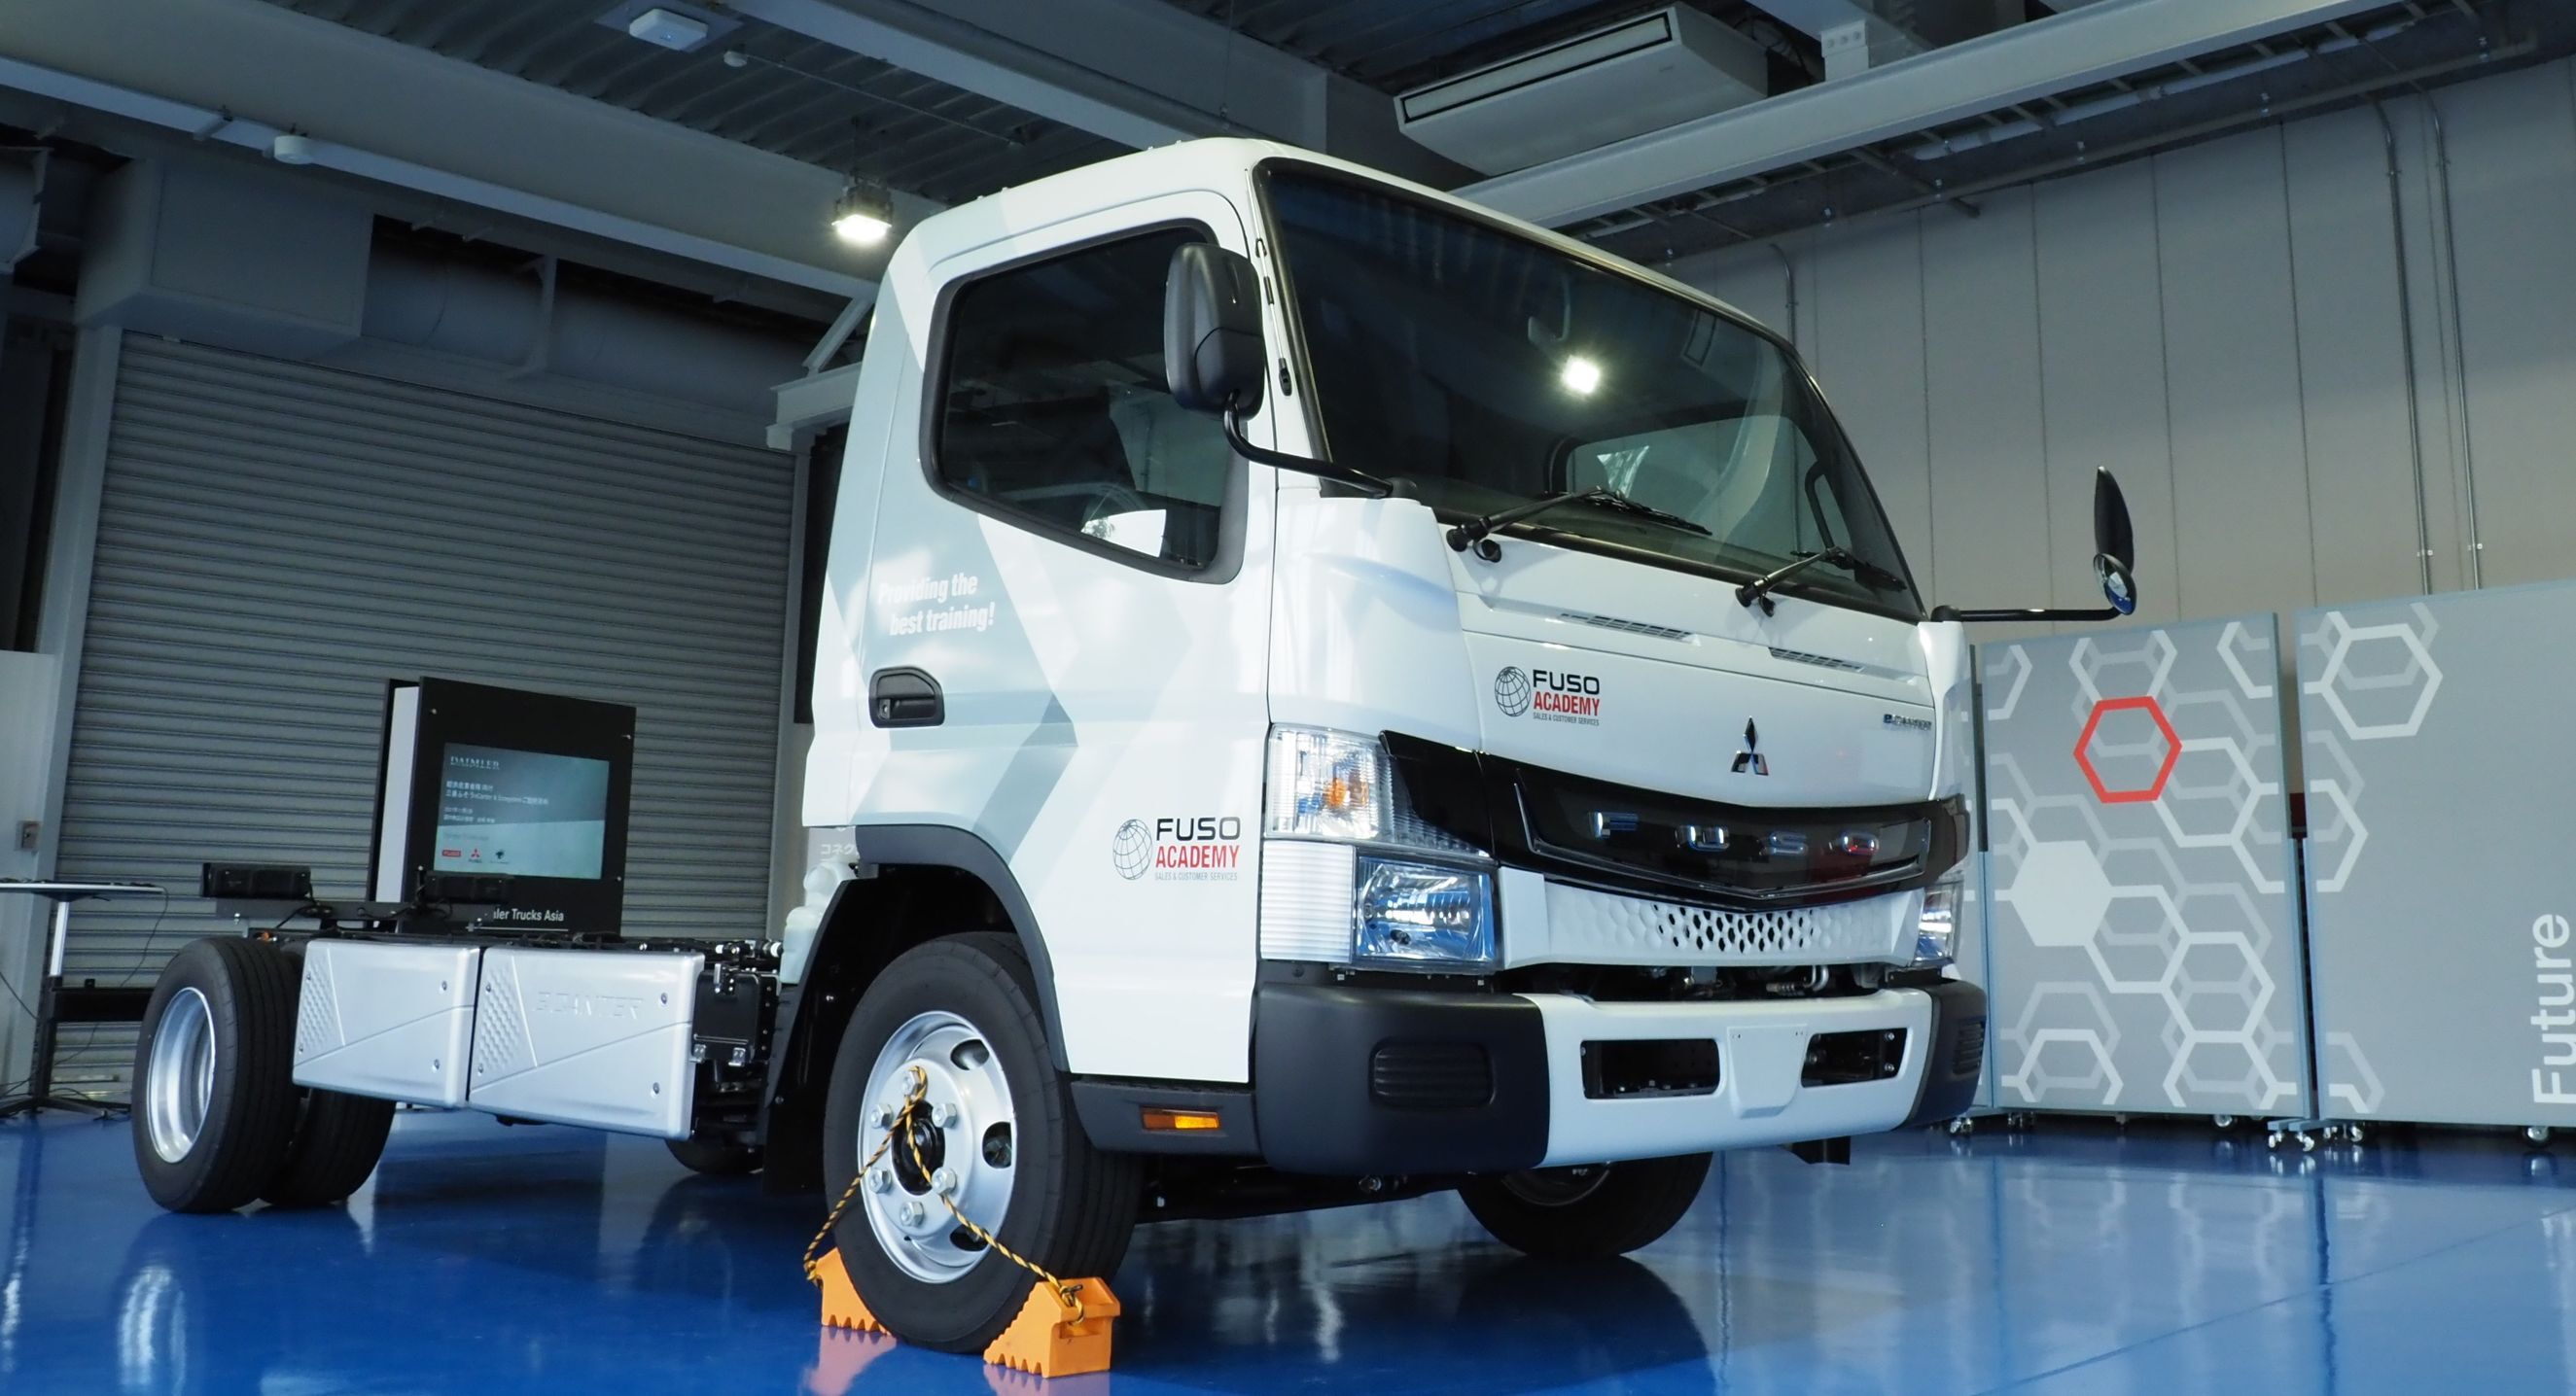 emobility-customer-experience-center-established-by-mitsubishi-fuso